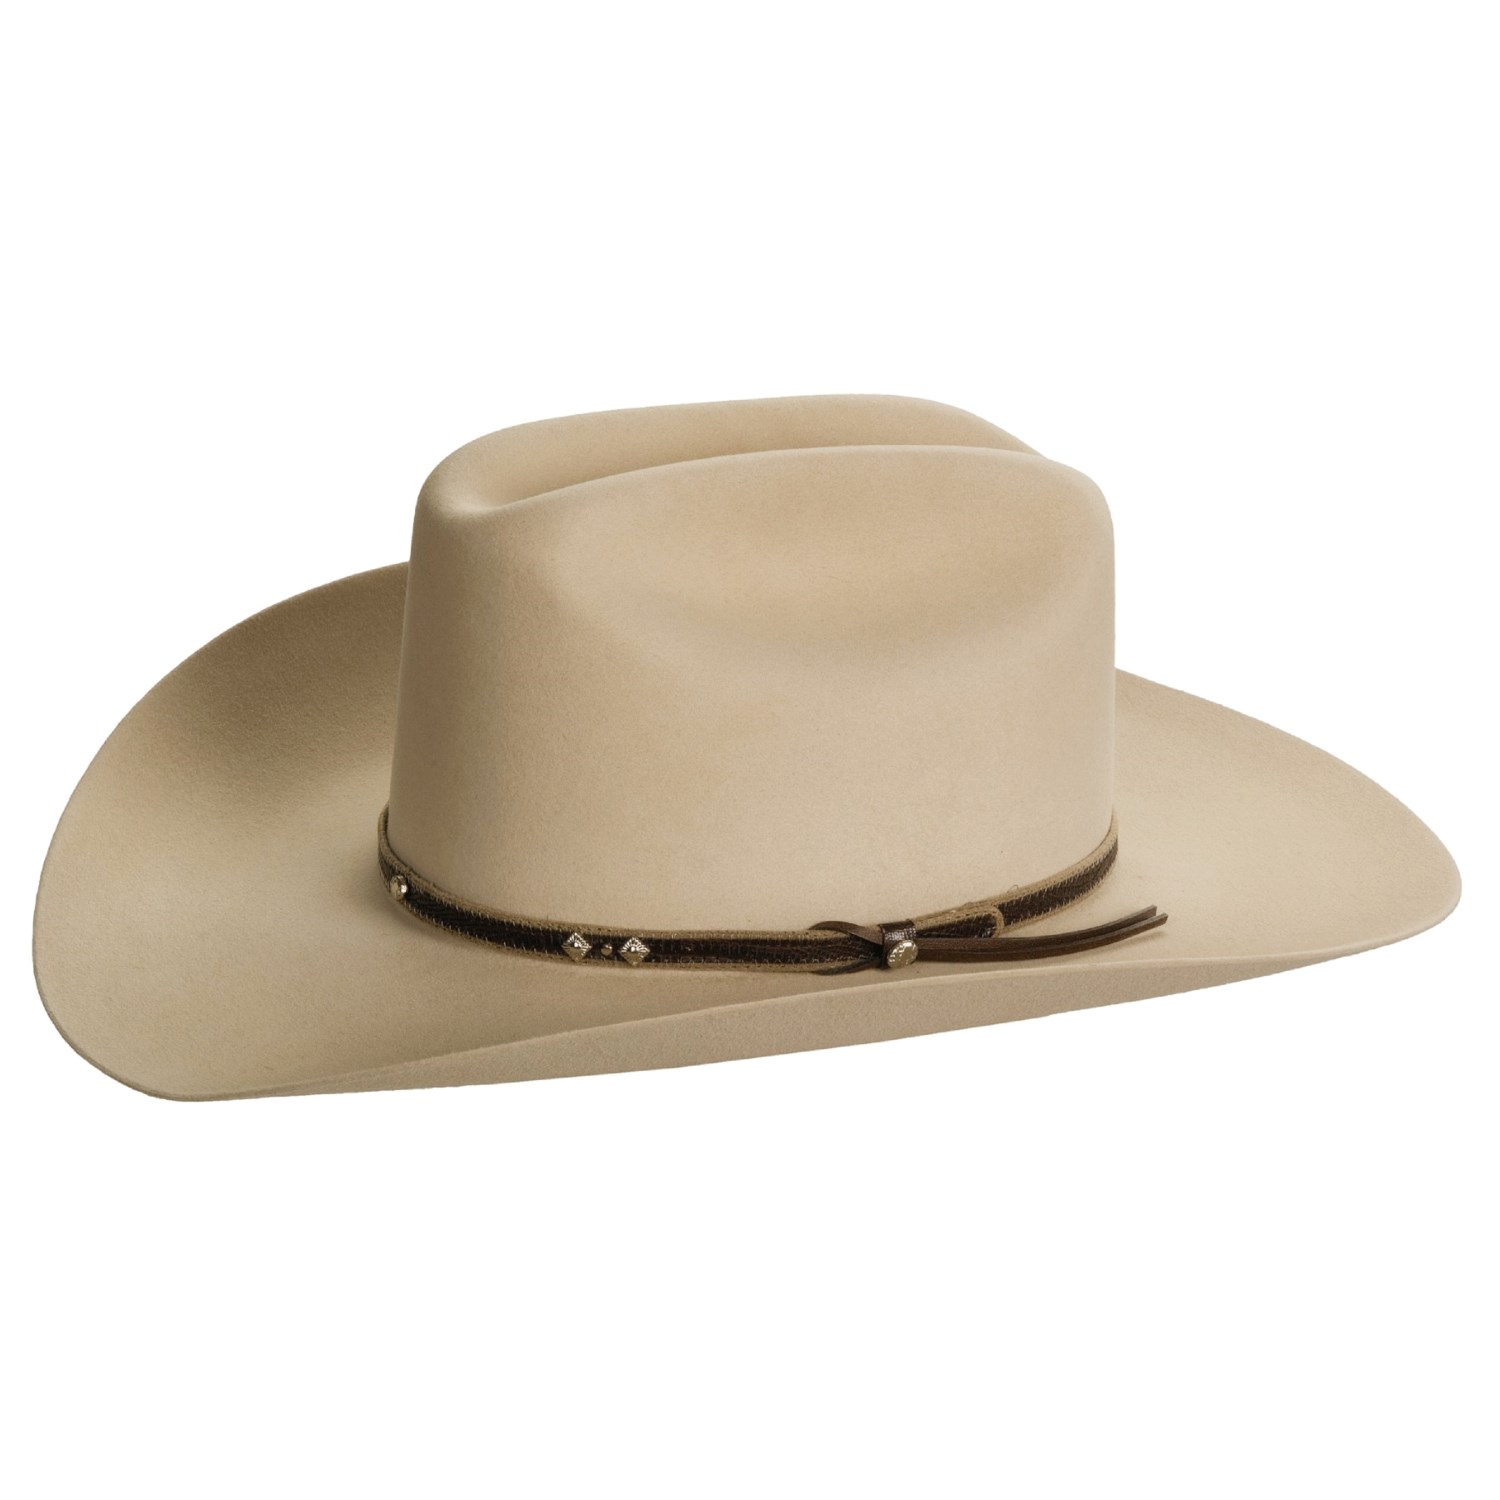 Resistol 3 Rivers Western Hat (For Men and Women) 89867 - Save 72%